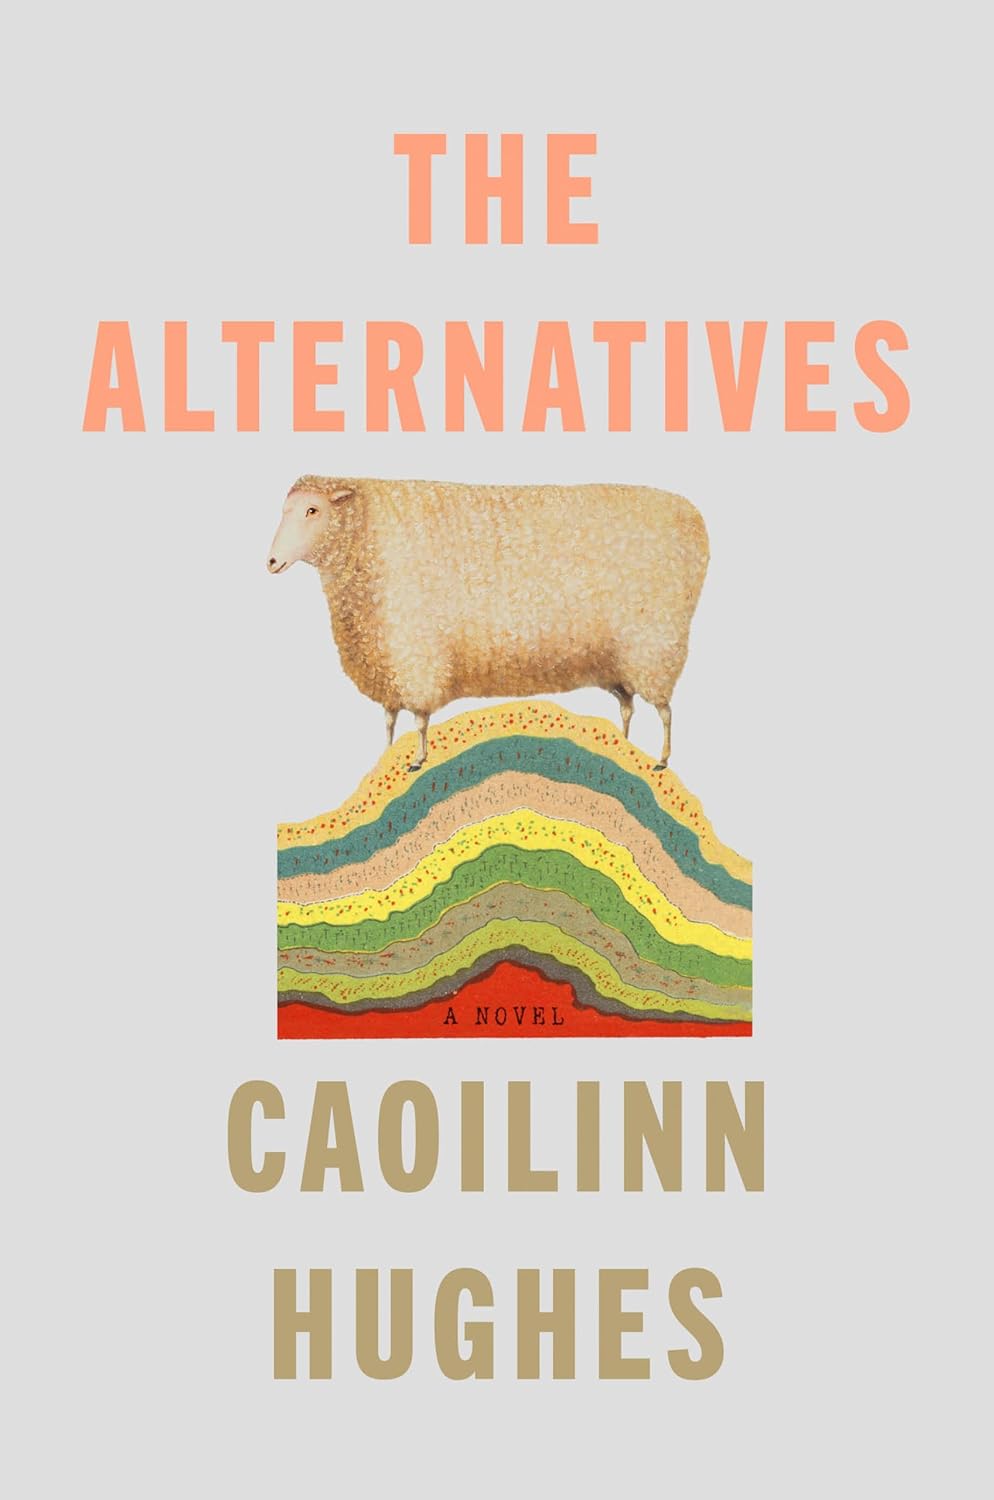 Image for "The Alternatives"